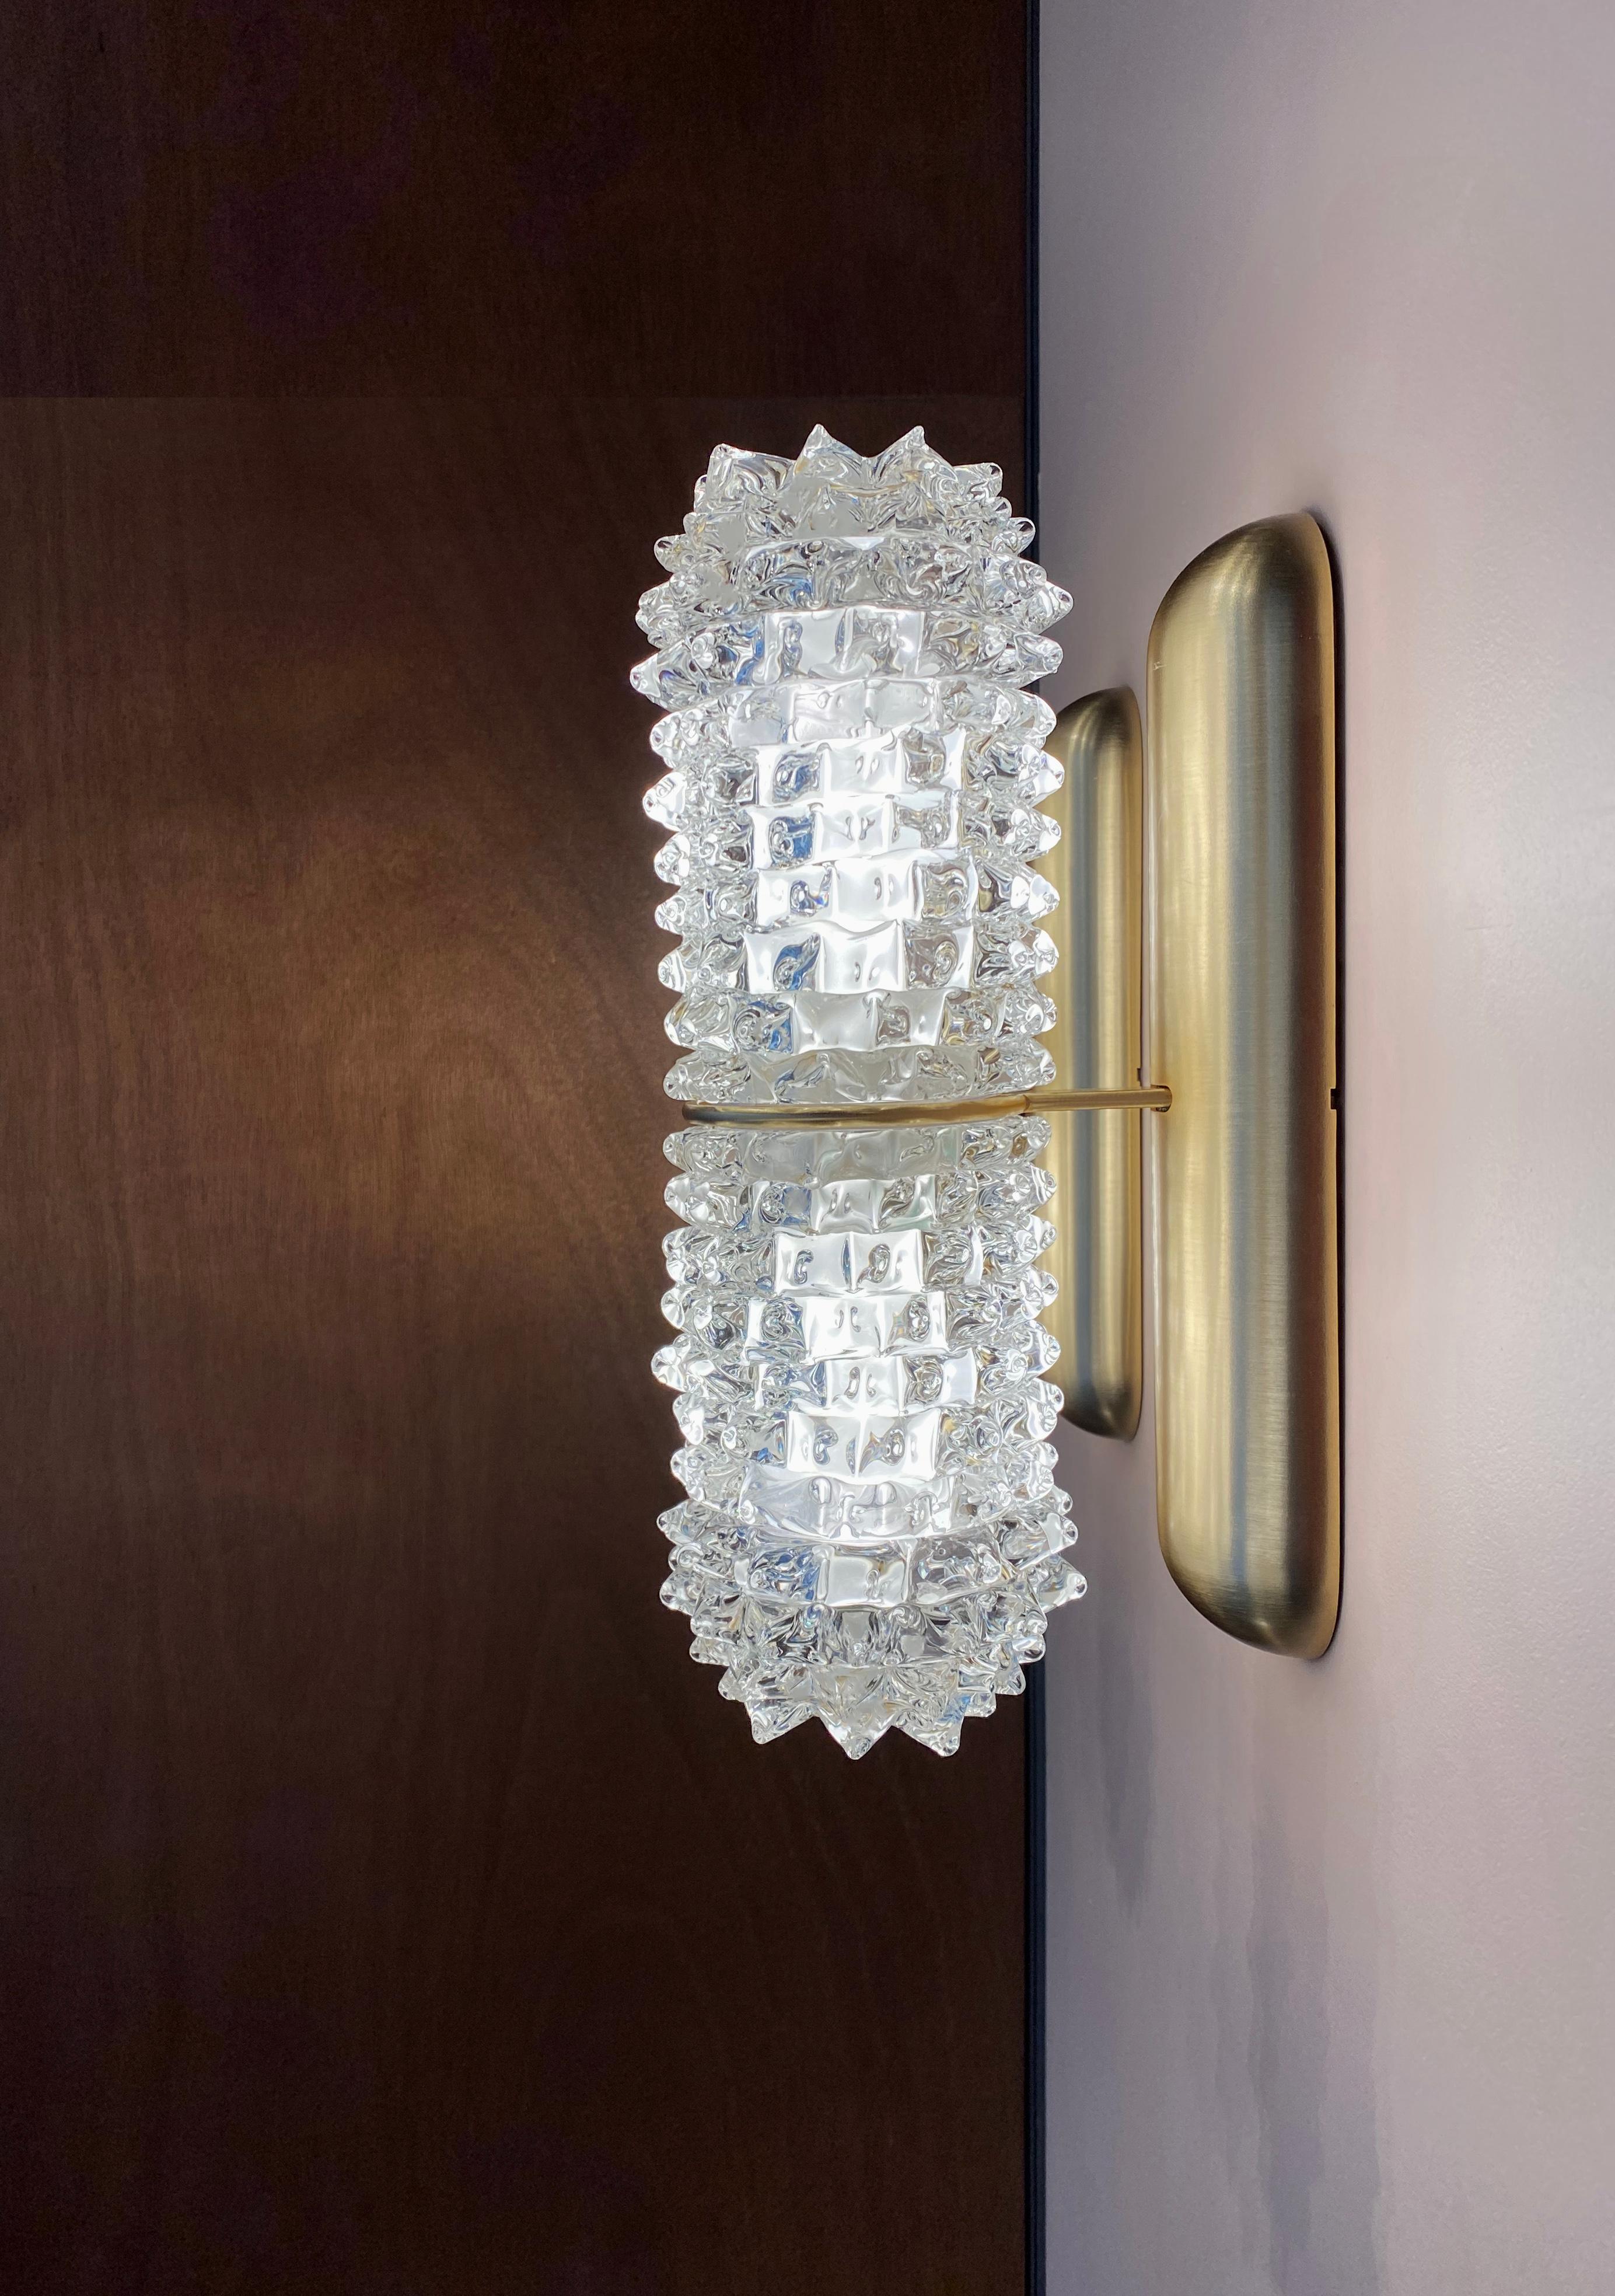 Barovier & Toso Opera 7389 Wall Sconce in Crystal with Black Nickel Finish 1